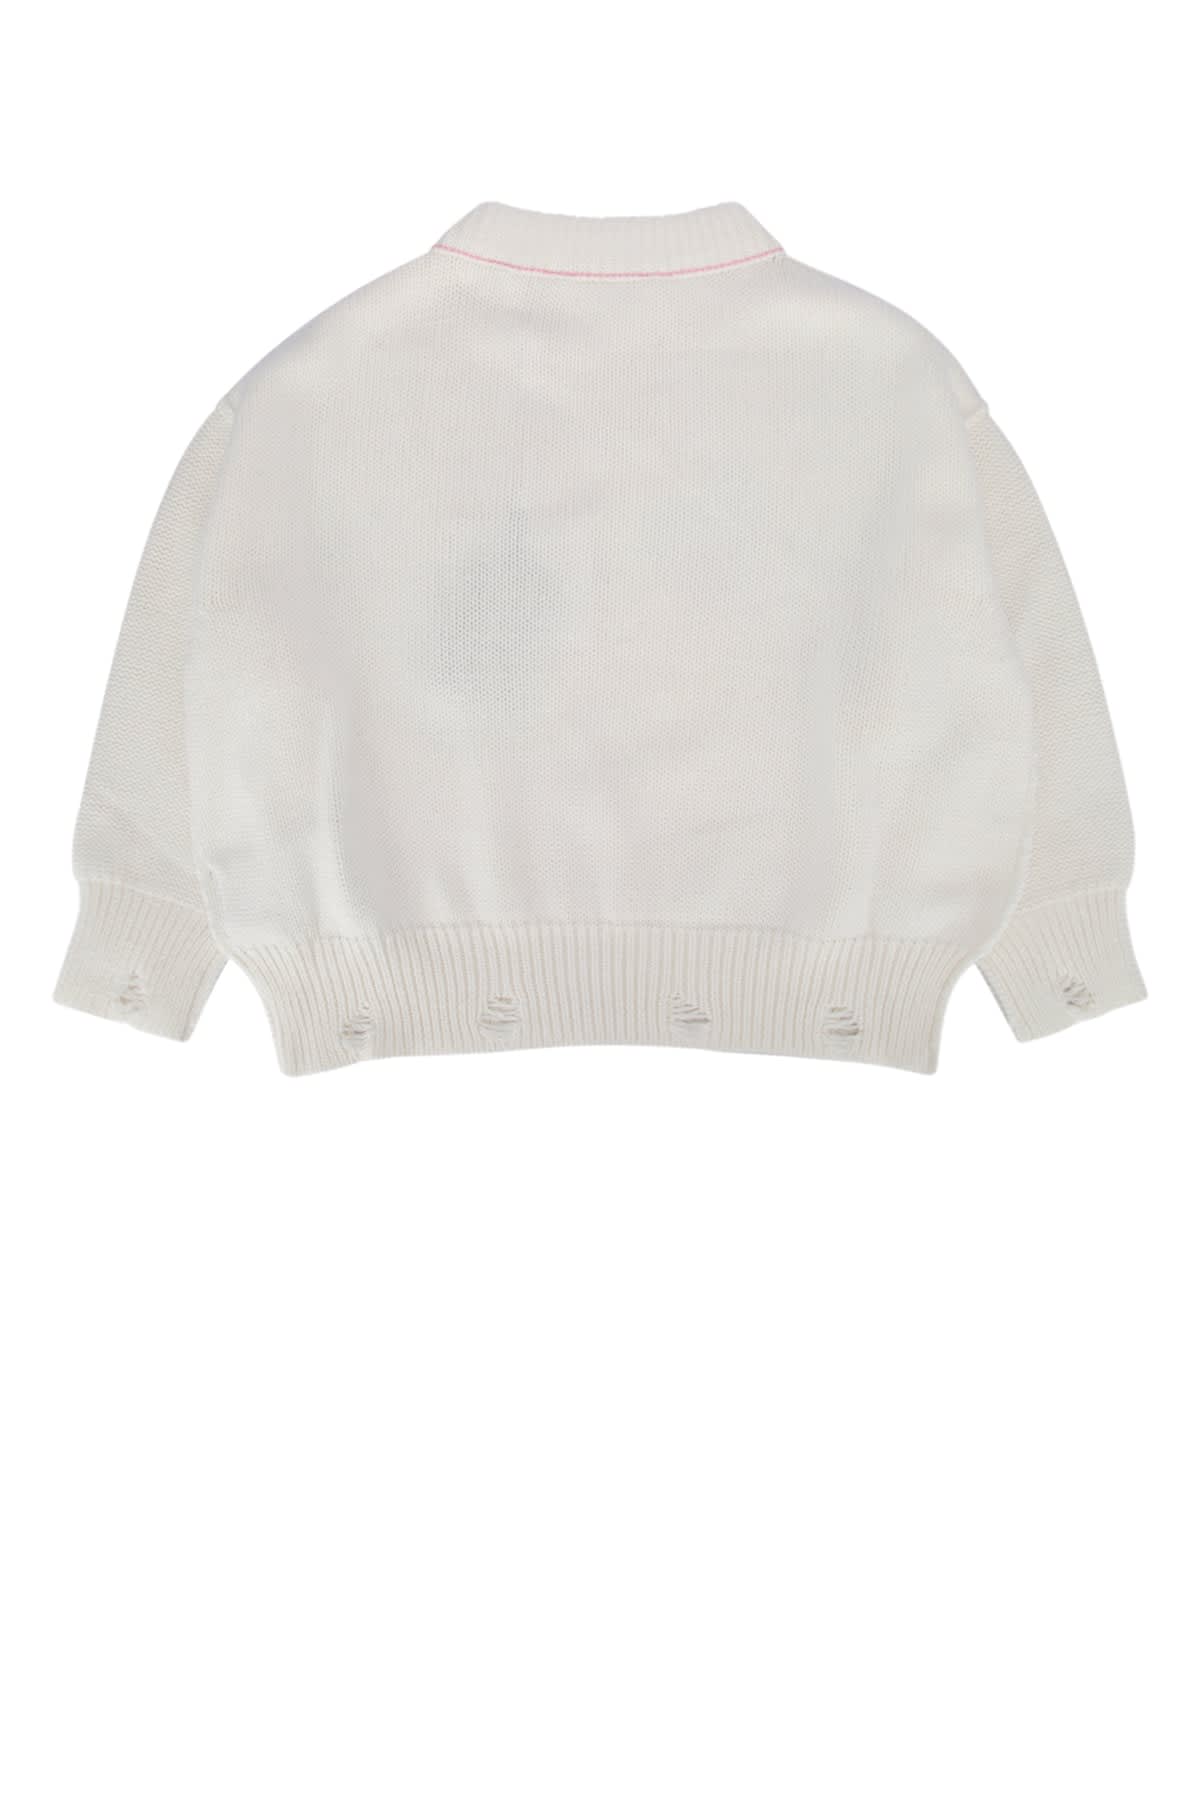 Palm Angels Kids' Maglieria In Offwhite